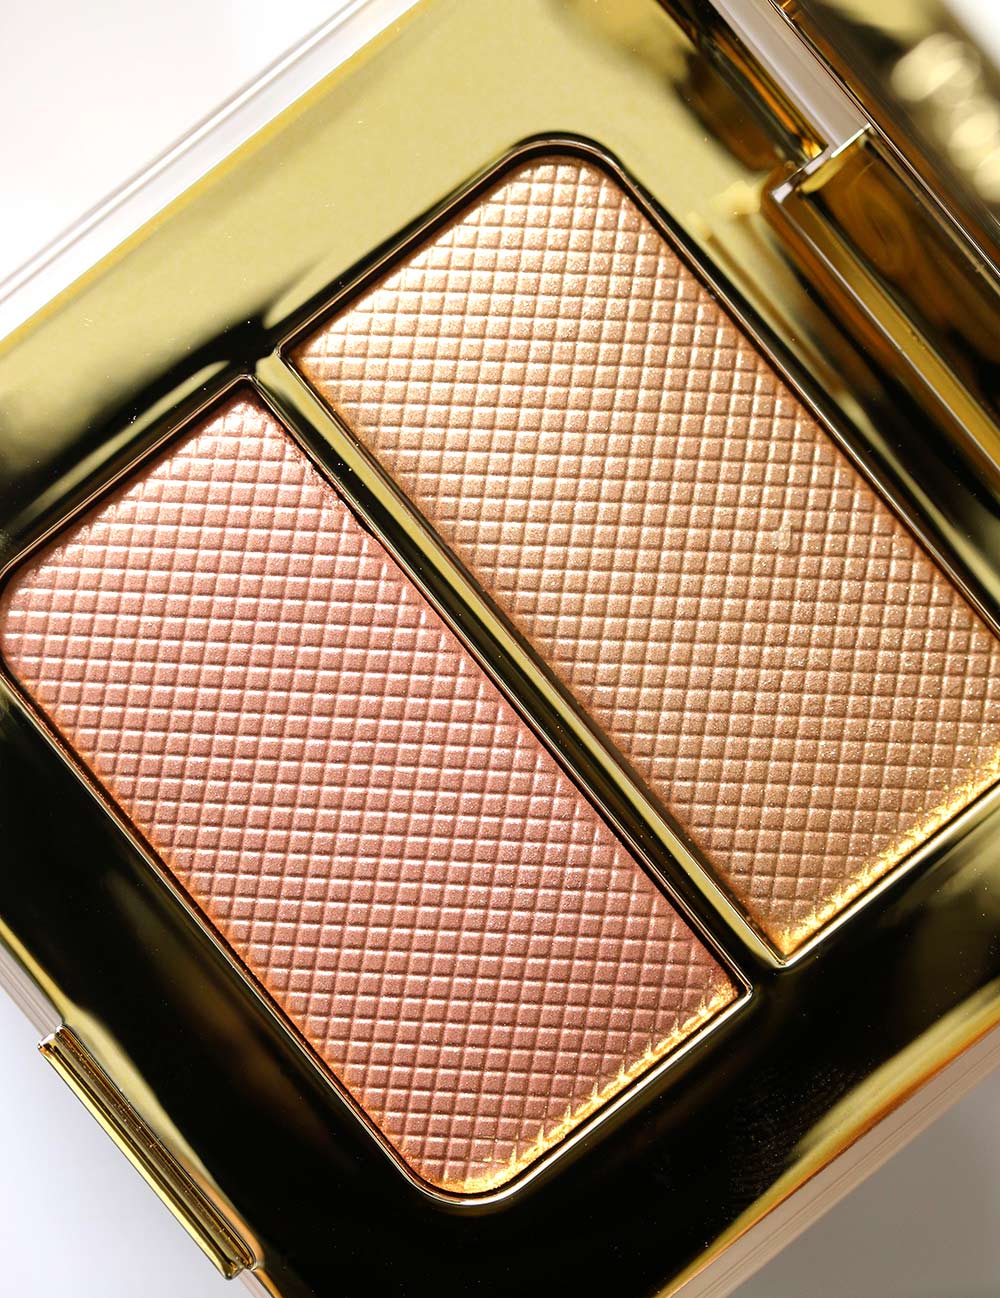 tom ford sheer highlighting duo reflects gilt